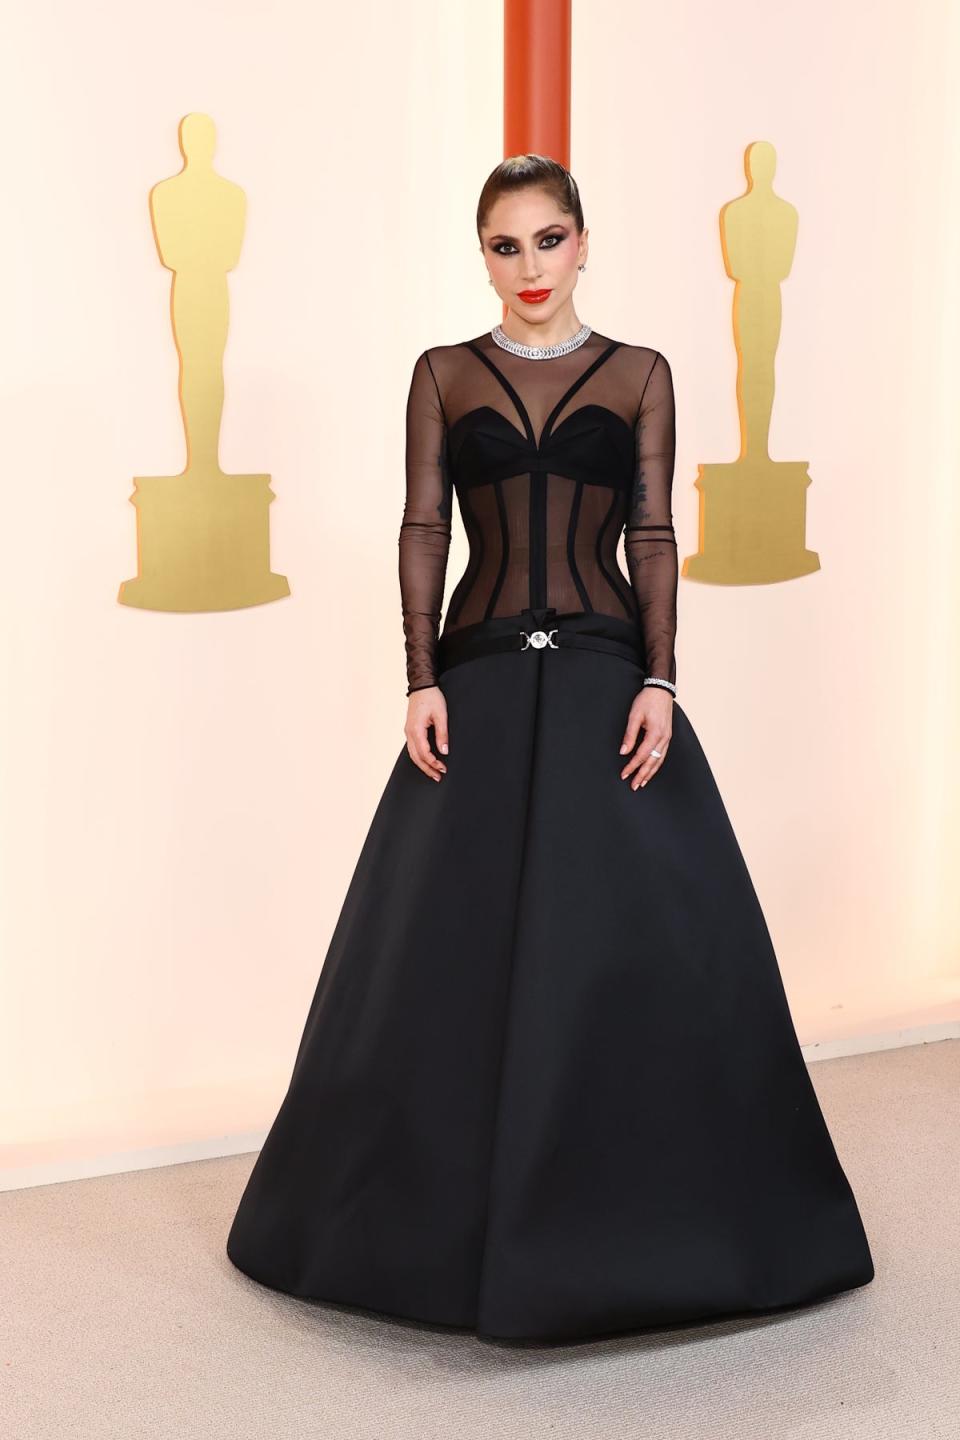 Lady Gaga in Atelier Versace and Tiffany & Co.: (Getty Images)